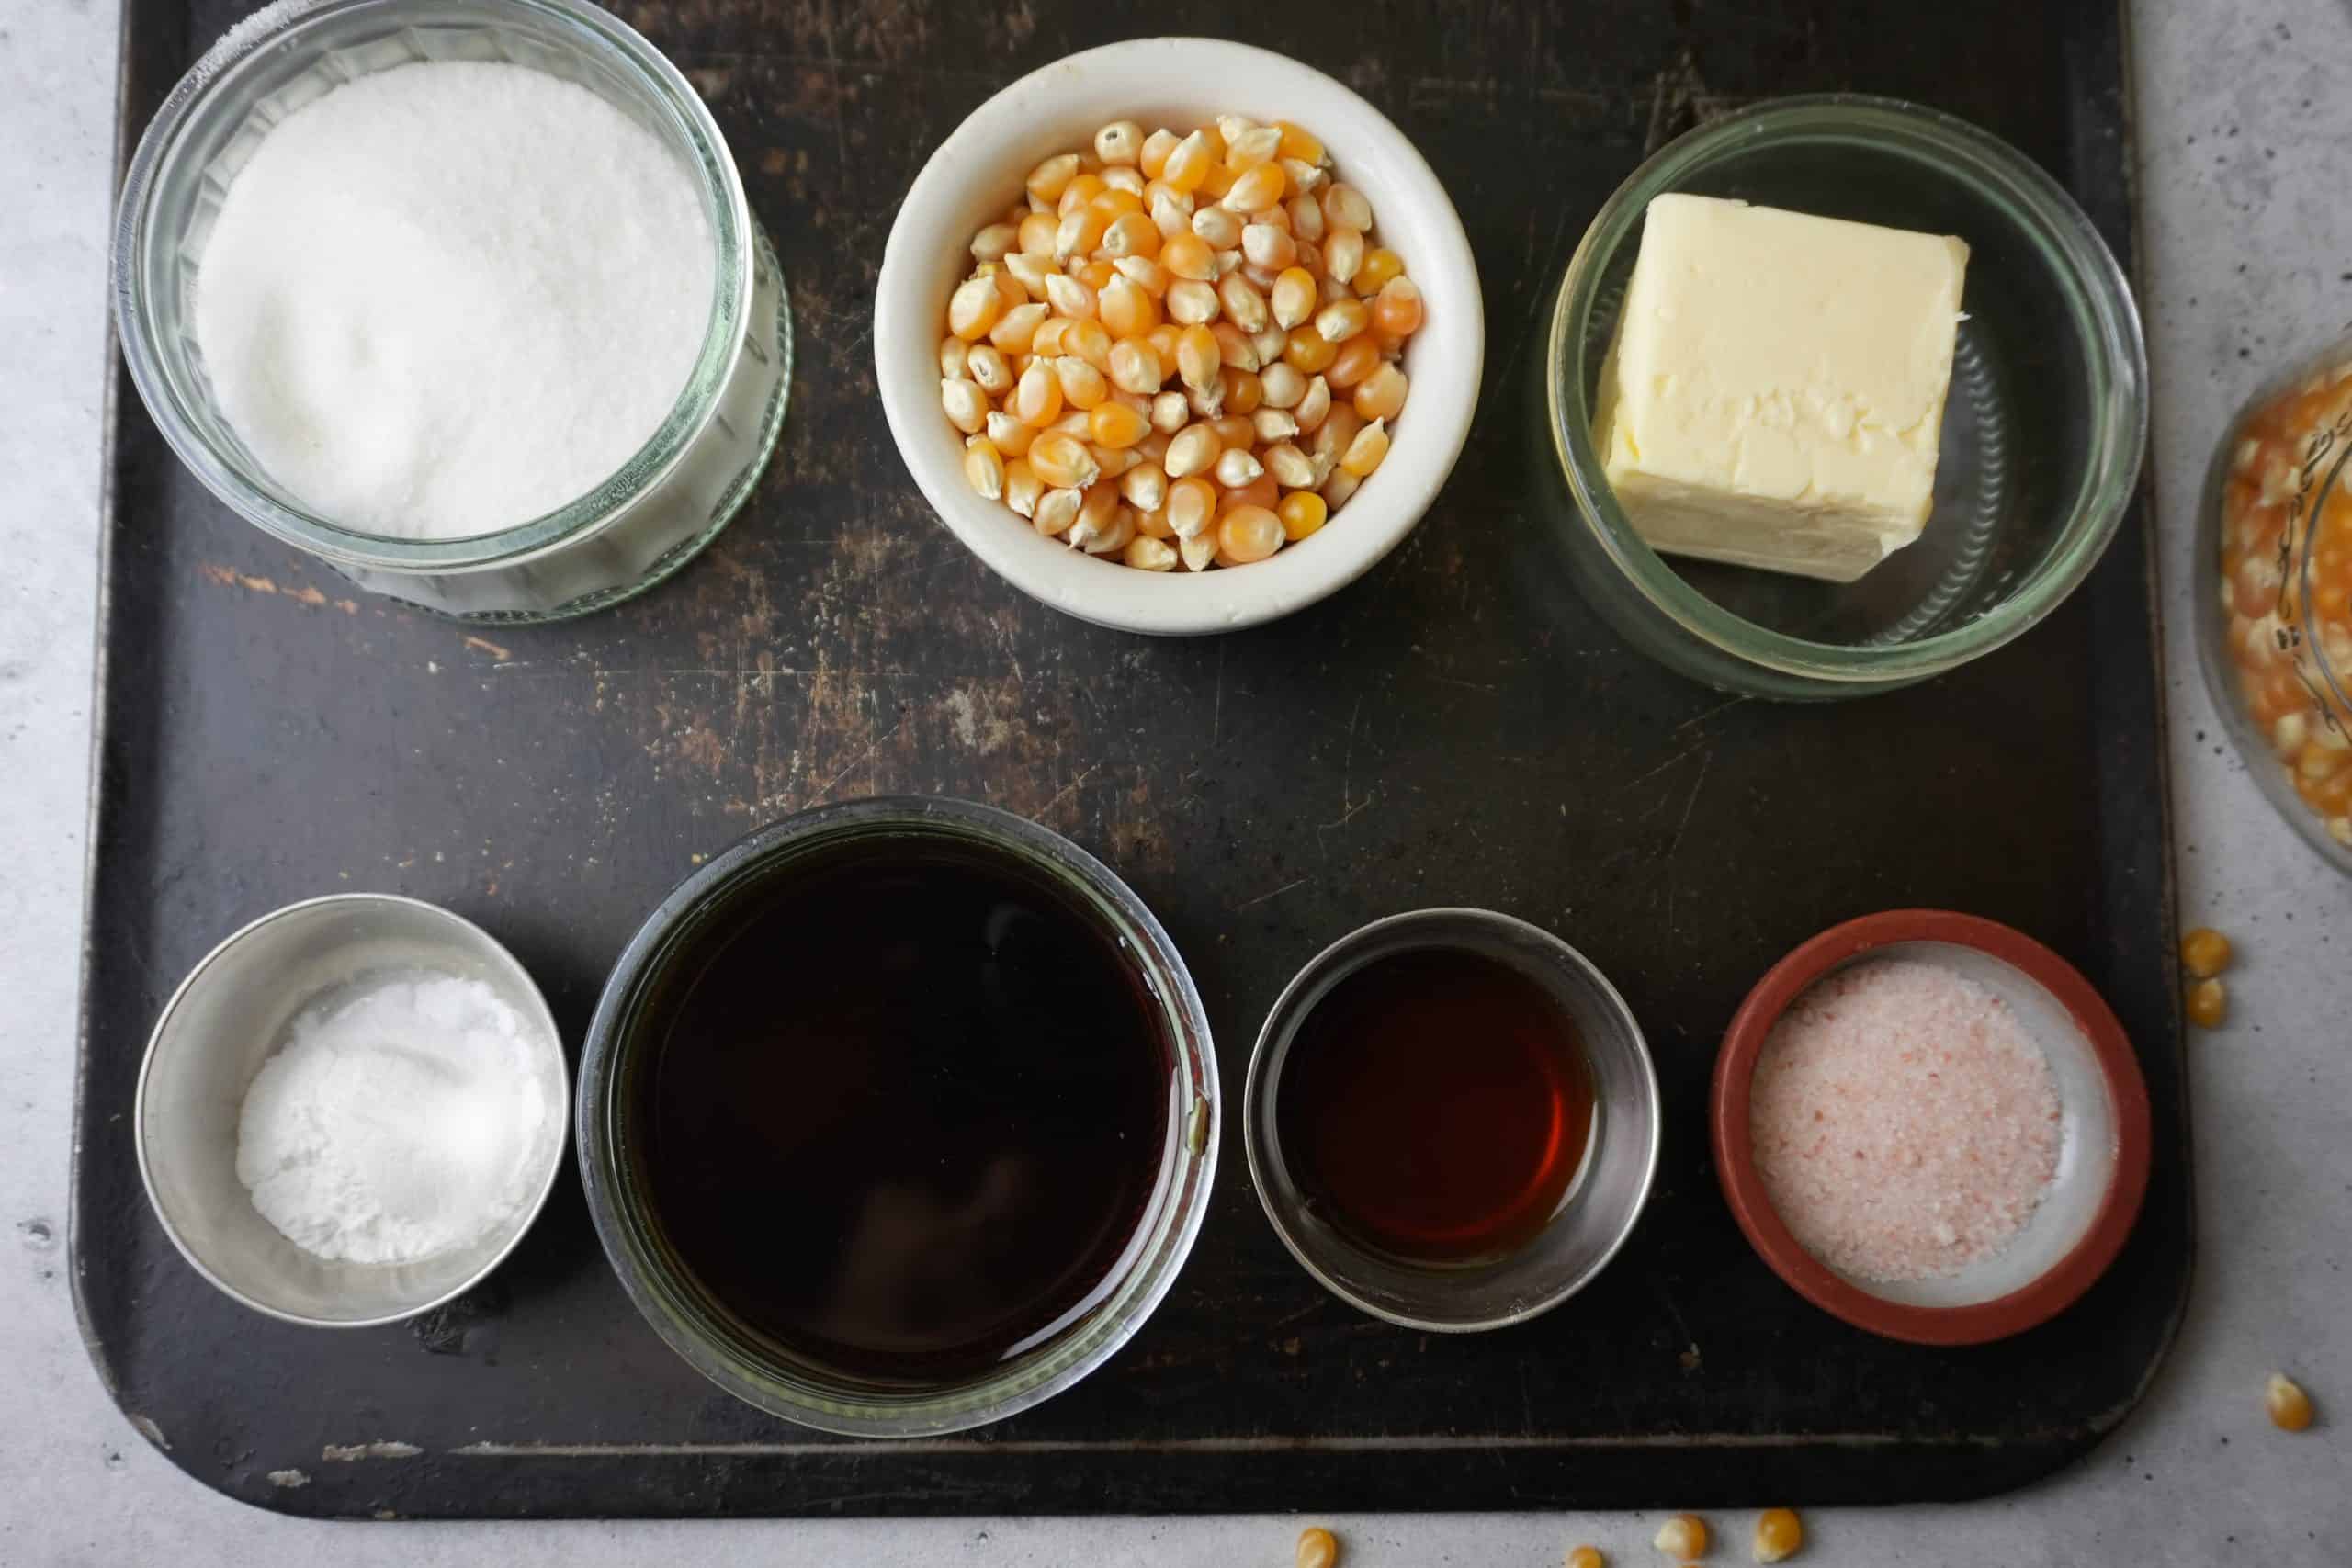 The ingredients for vegan caramel popcorn in small cups on a black metal tray- sugar, popcorn, salt, vegan butter, vanilla extract, baking soda, and maple syrup